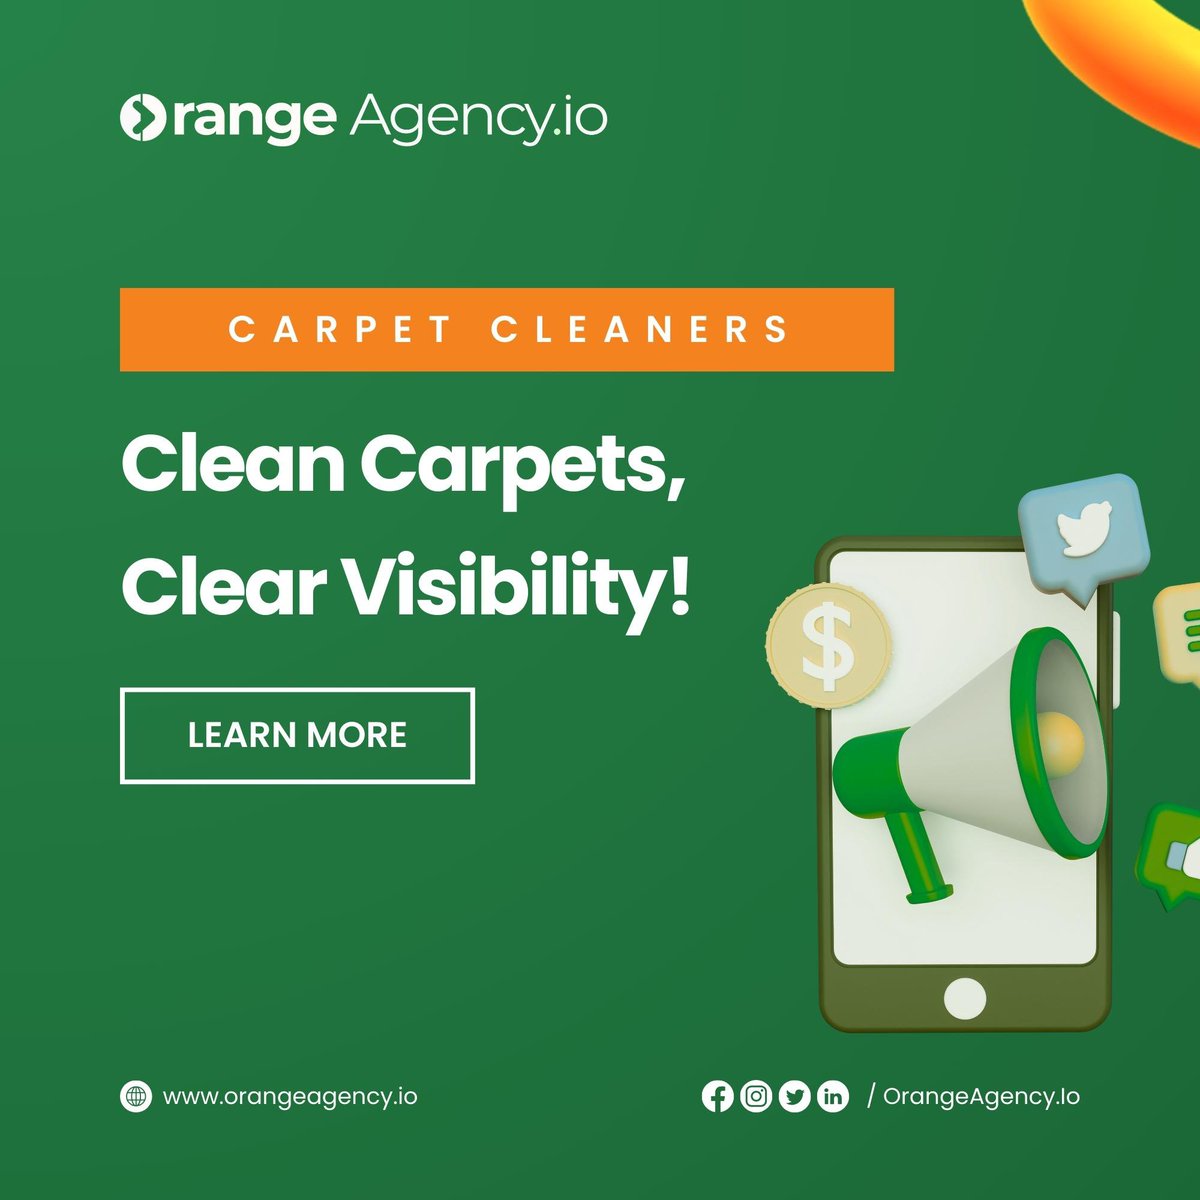 Clean Carpets, Clear Visibility!

Refresh Your Space - Contact Us Today! bit.ly/49vy3YH

#OrangeAgency #CleanCarpets #CarpetCleaningAds #CarpetFreshness #CleanHome #CarpetRevival #FreshCarpets #CarpetCleaningDeals #CarpetCare #HomeCleaning #Halloween #FNAF #Friends